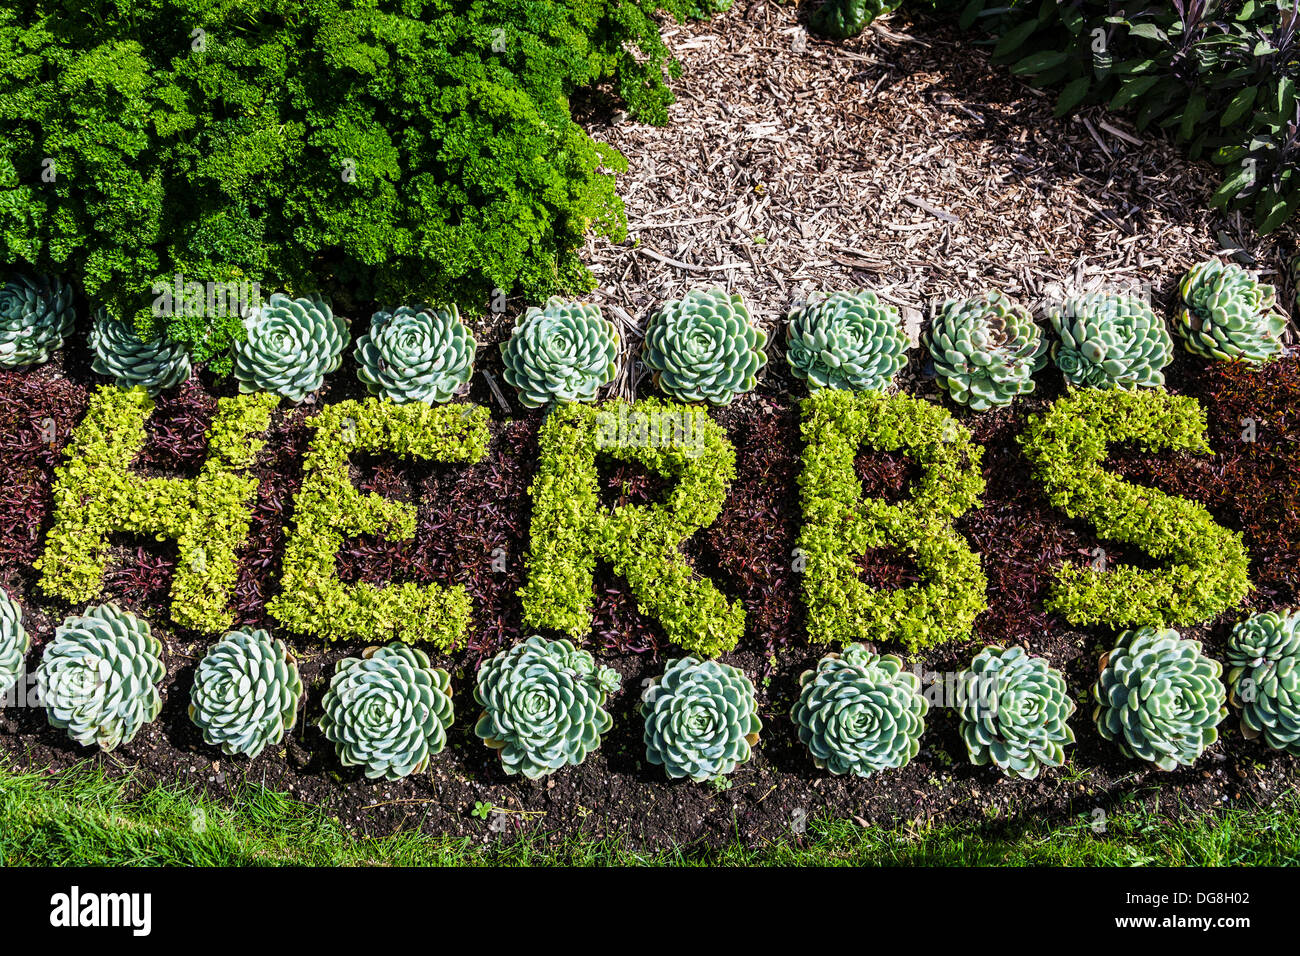 Detail of the herb and flower bedding display based on the childrens' TV show 'The Herbs' in the Parade Gardens, Bath, UK. Stock Photo